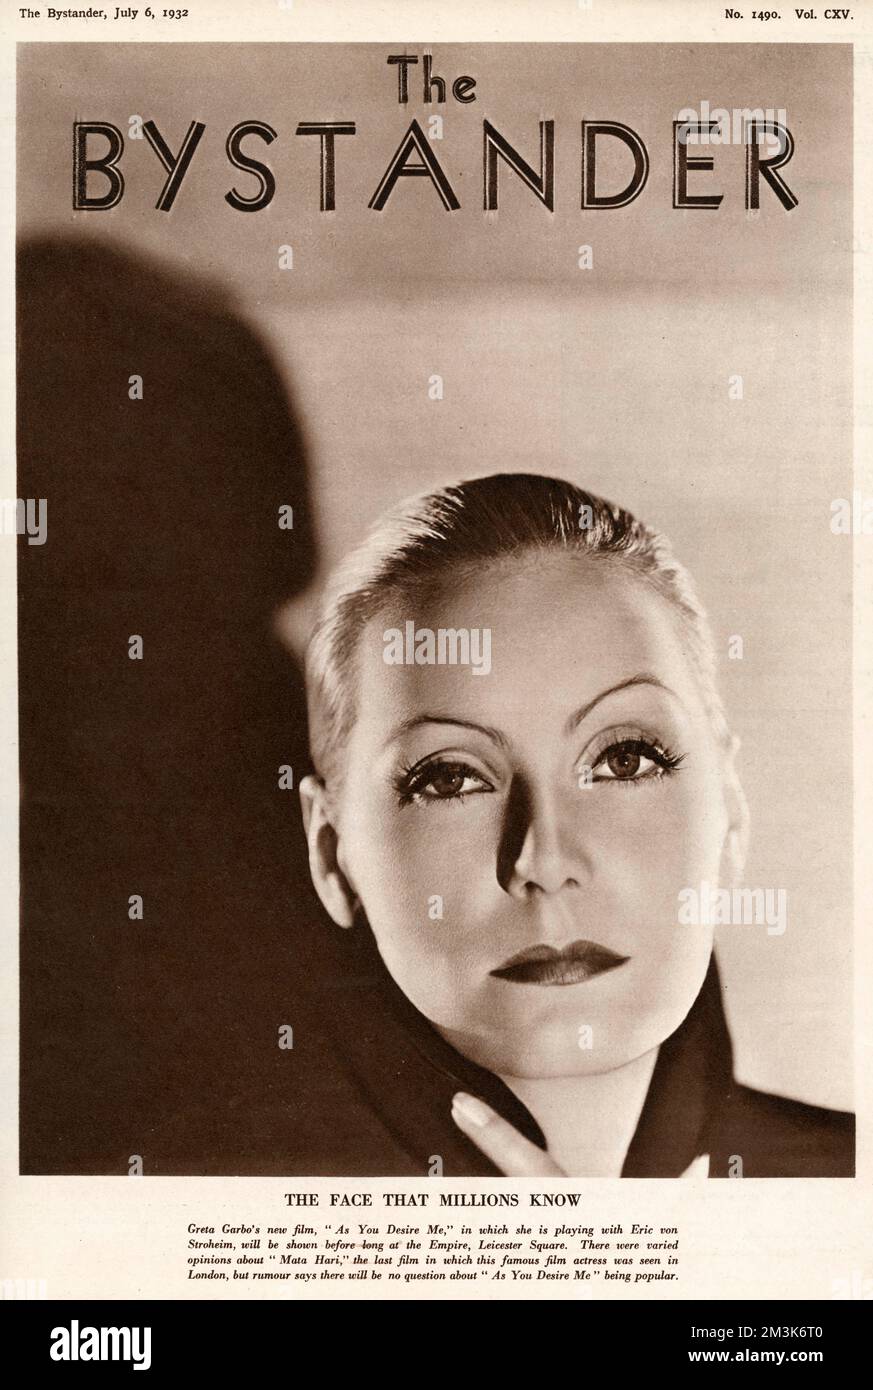 Greta Garbo (1905 - 1990), advertising her film 'As You Desire Me.' Greta Garbo was born in Stockholm and was 'spotted' whilst studying at the Royal Theatre Dramatic School by the Swedish director Mauritz Stiller. Her first Hollywood film was 'The Temptress' 1926. Amongst her other successes are, 'Queen Christie' (1930), 'Anna Karenina' (1935) and 'Ninotchka' (1939). She retired from films in 1941, after receiving poor reviews for 'Two-Faced Woman.' She spent the rest of her life living as a recluse in New York.  1932 Stock Photo